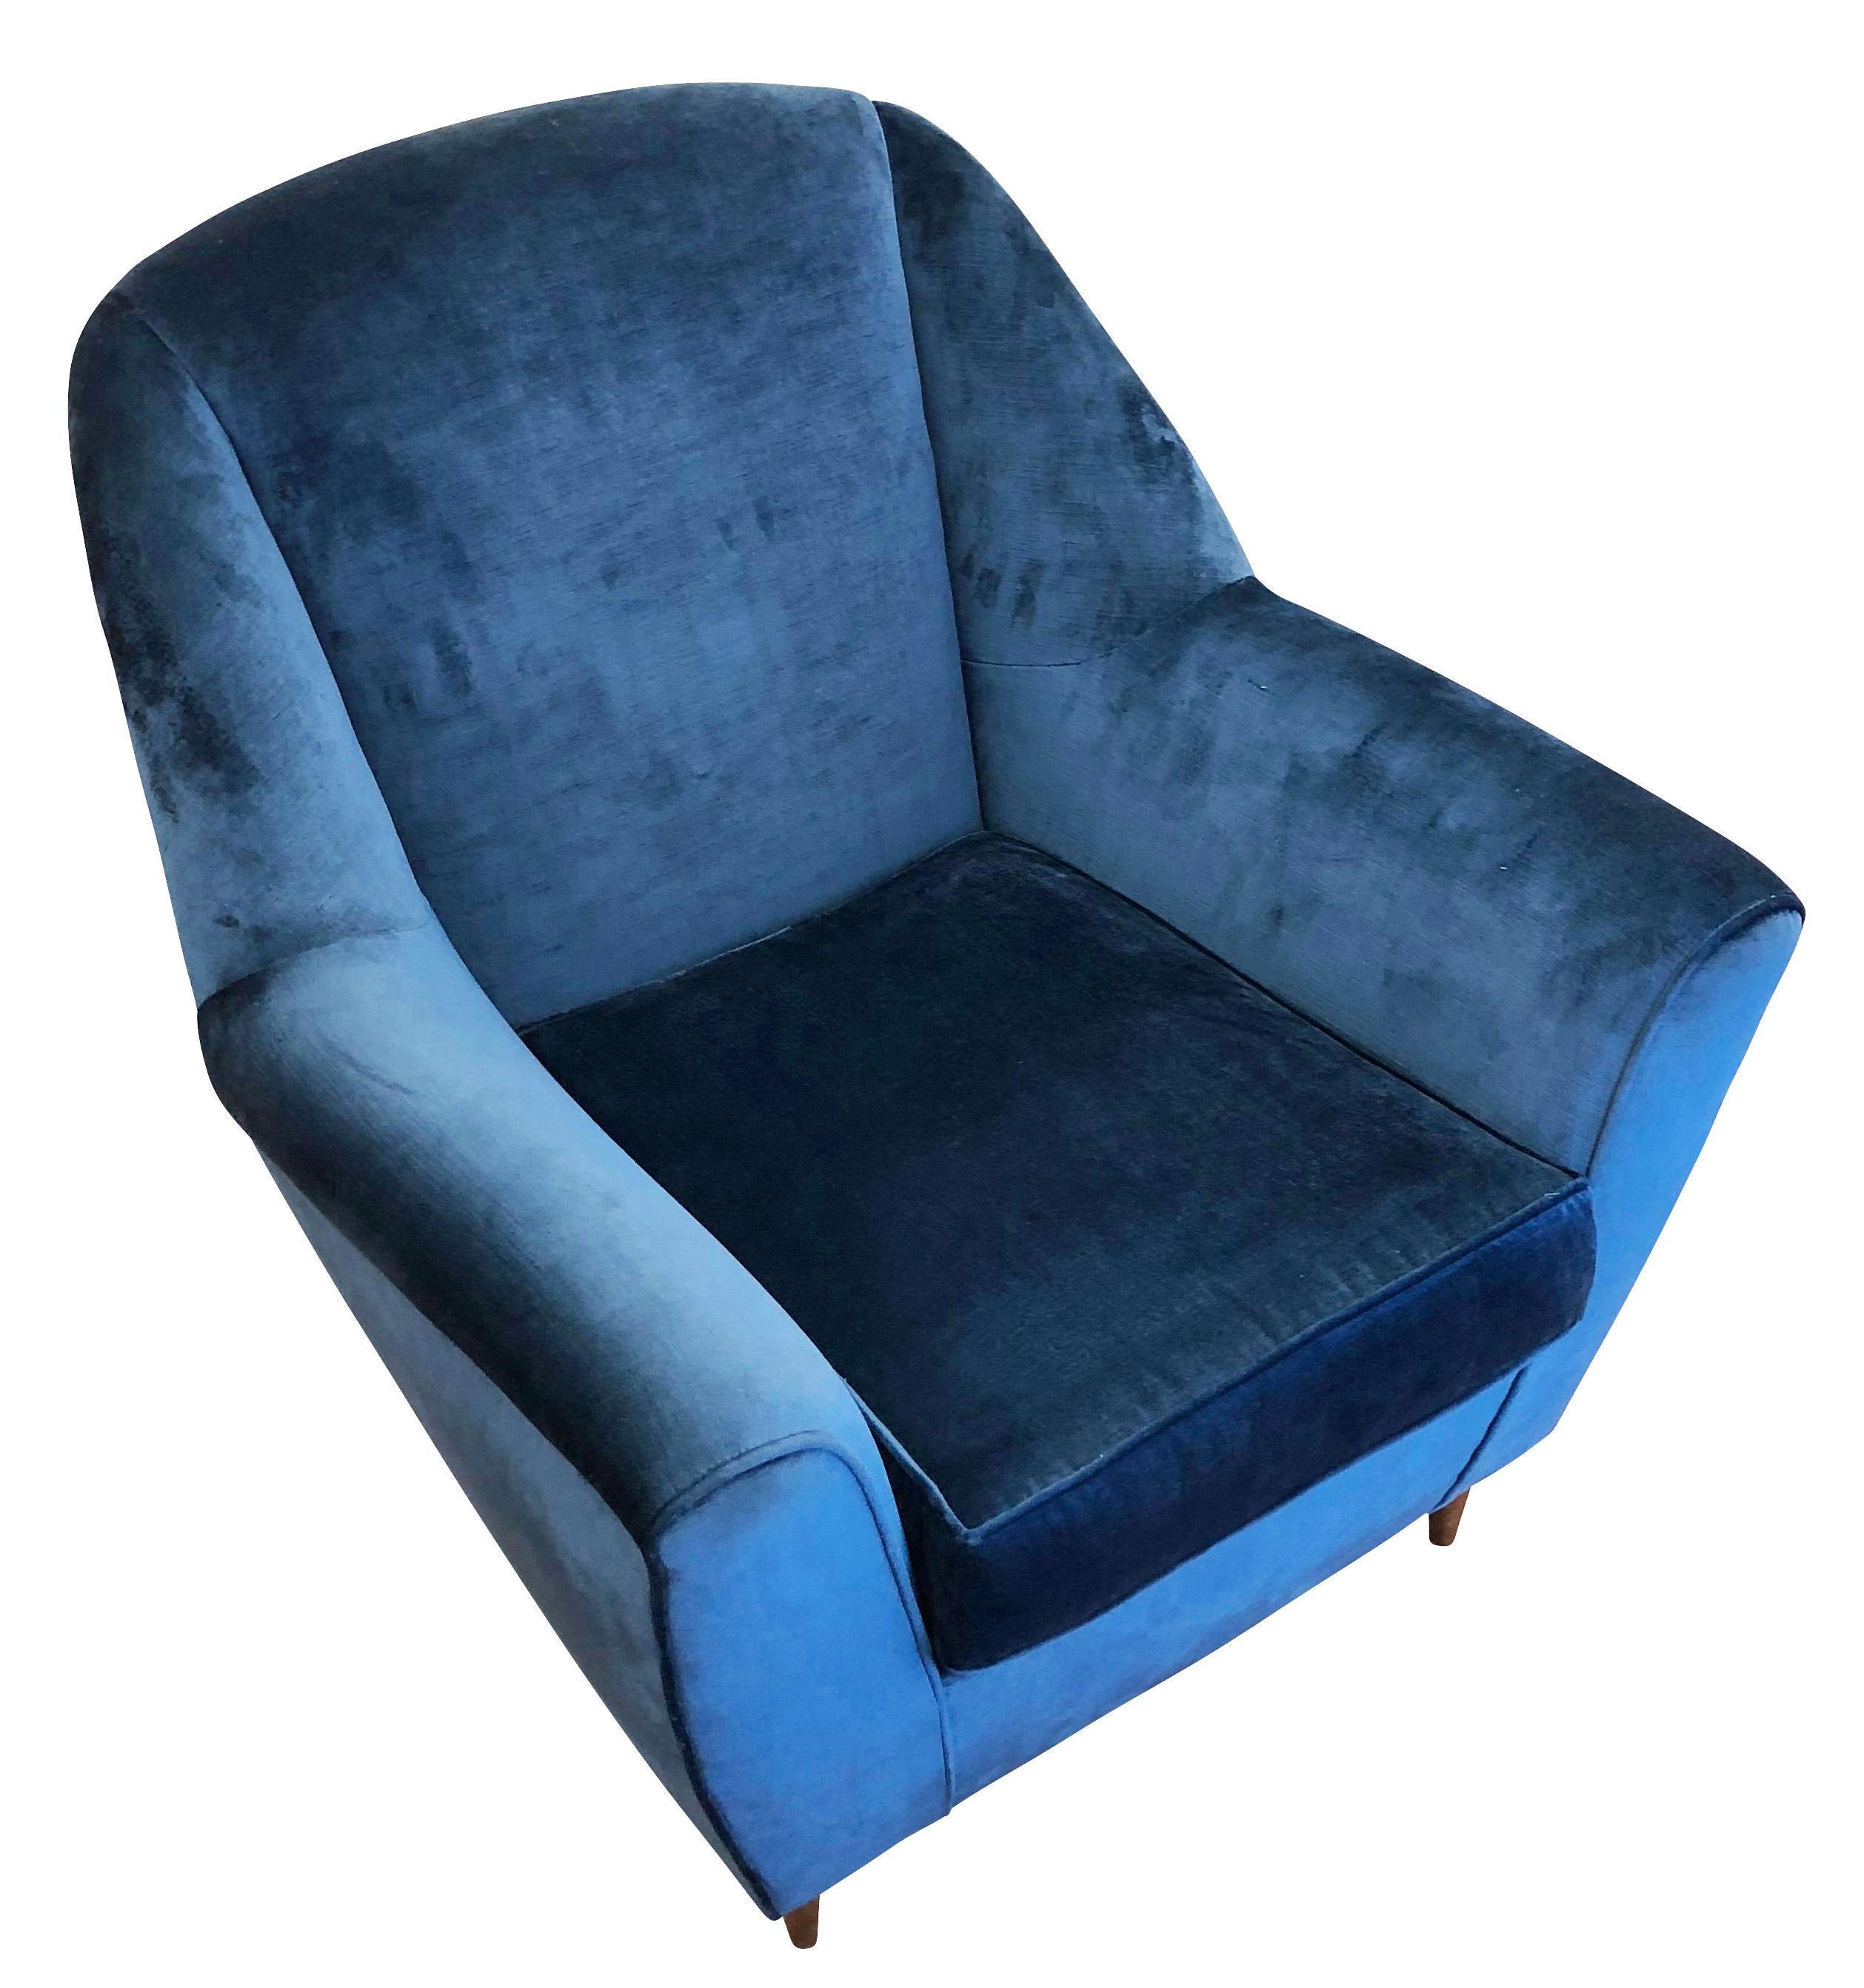 Mid-Century lounge chair with a wide seat and slanted back. Original feet are wood but can be replaced with brass ones on request. Has been upholstered in a blue velvet for display purposes. 

Condition: Re-upholstered

Measures: Width 32”

Depth